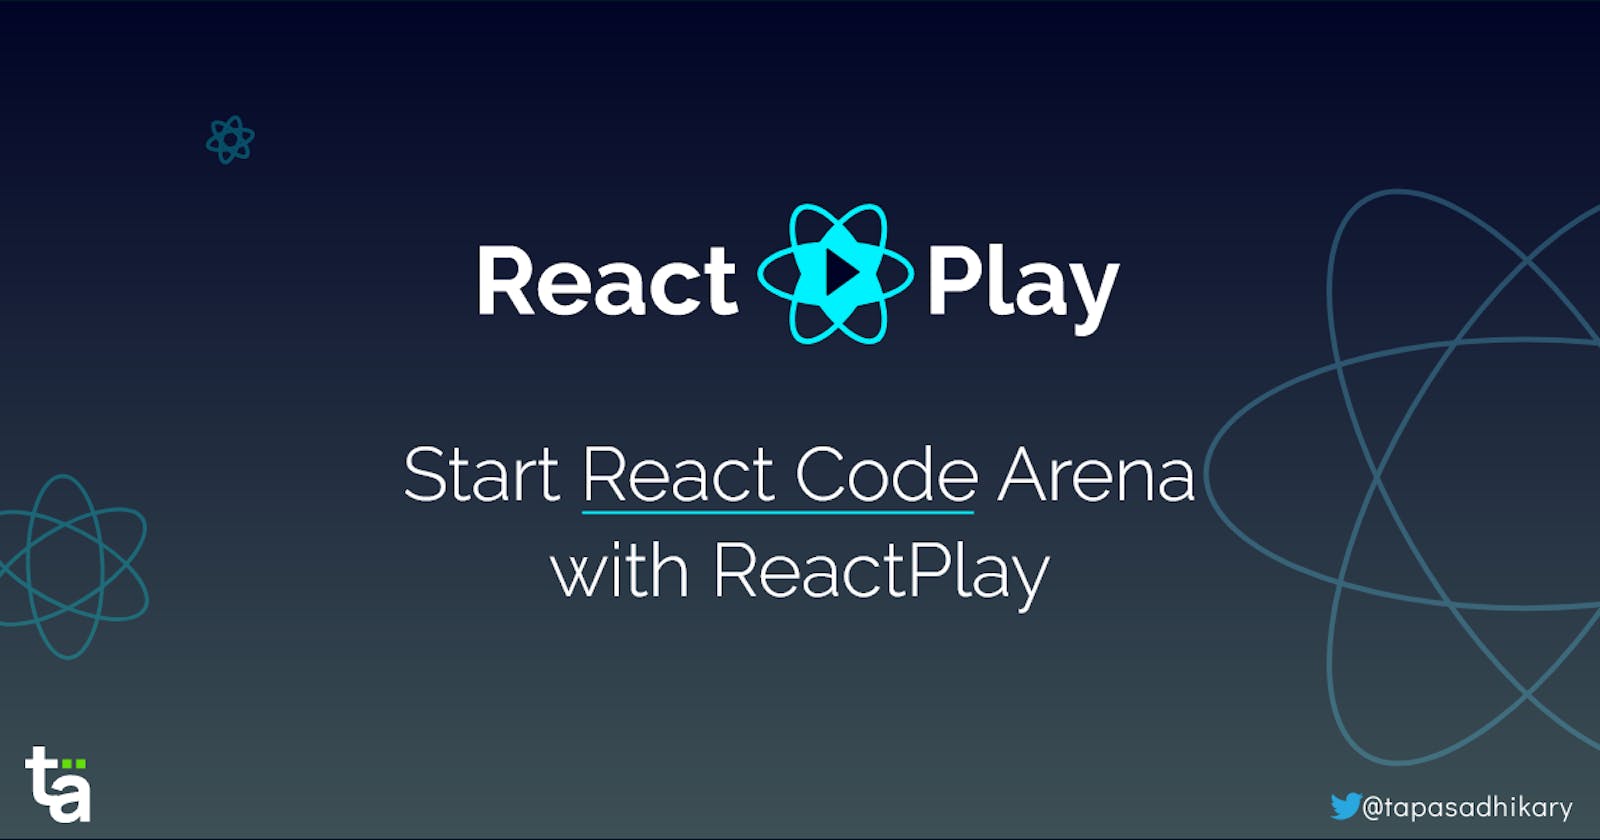 Introducing ReactPlay - Learn, Create, Share ReactJS projects